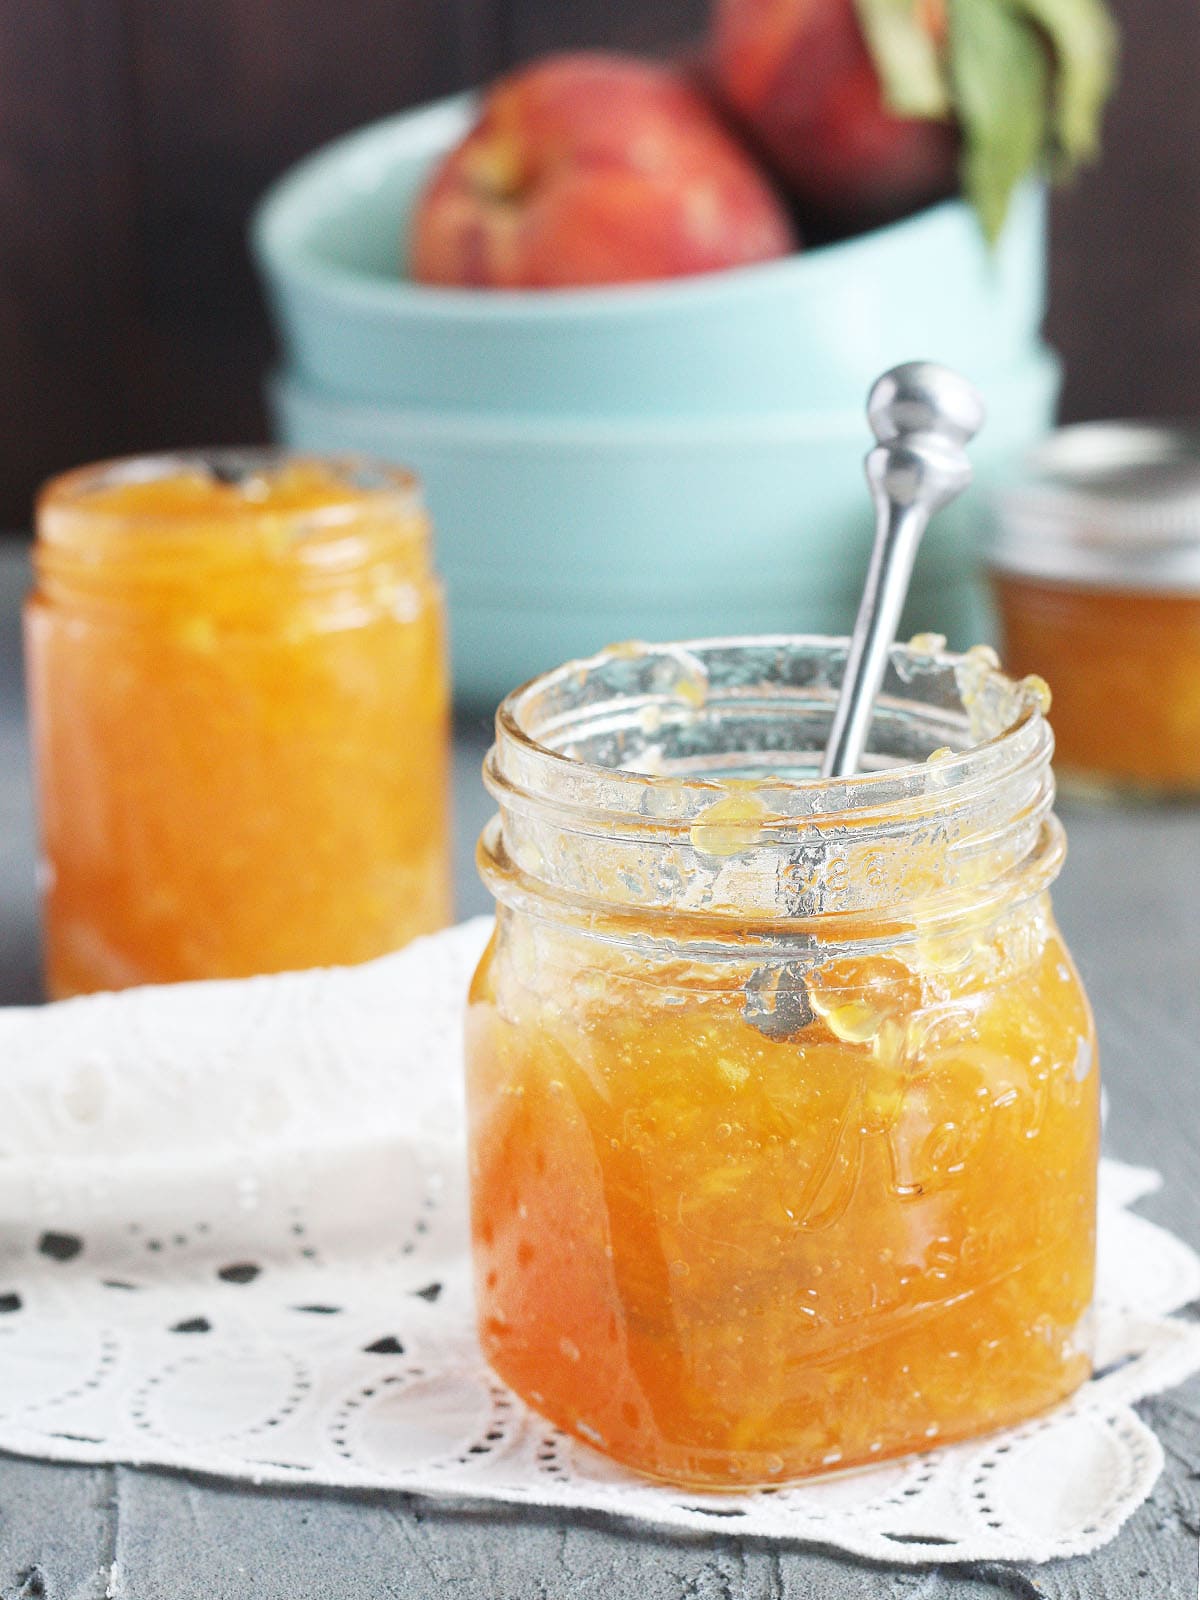 Two jars of homemade peach preserves with a small bowl of peaches in the background.